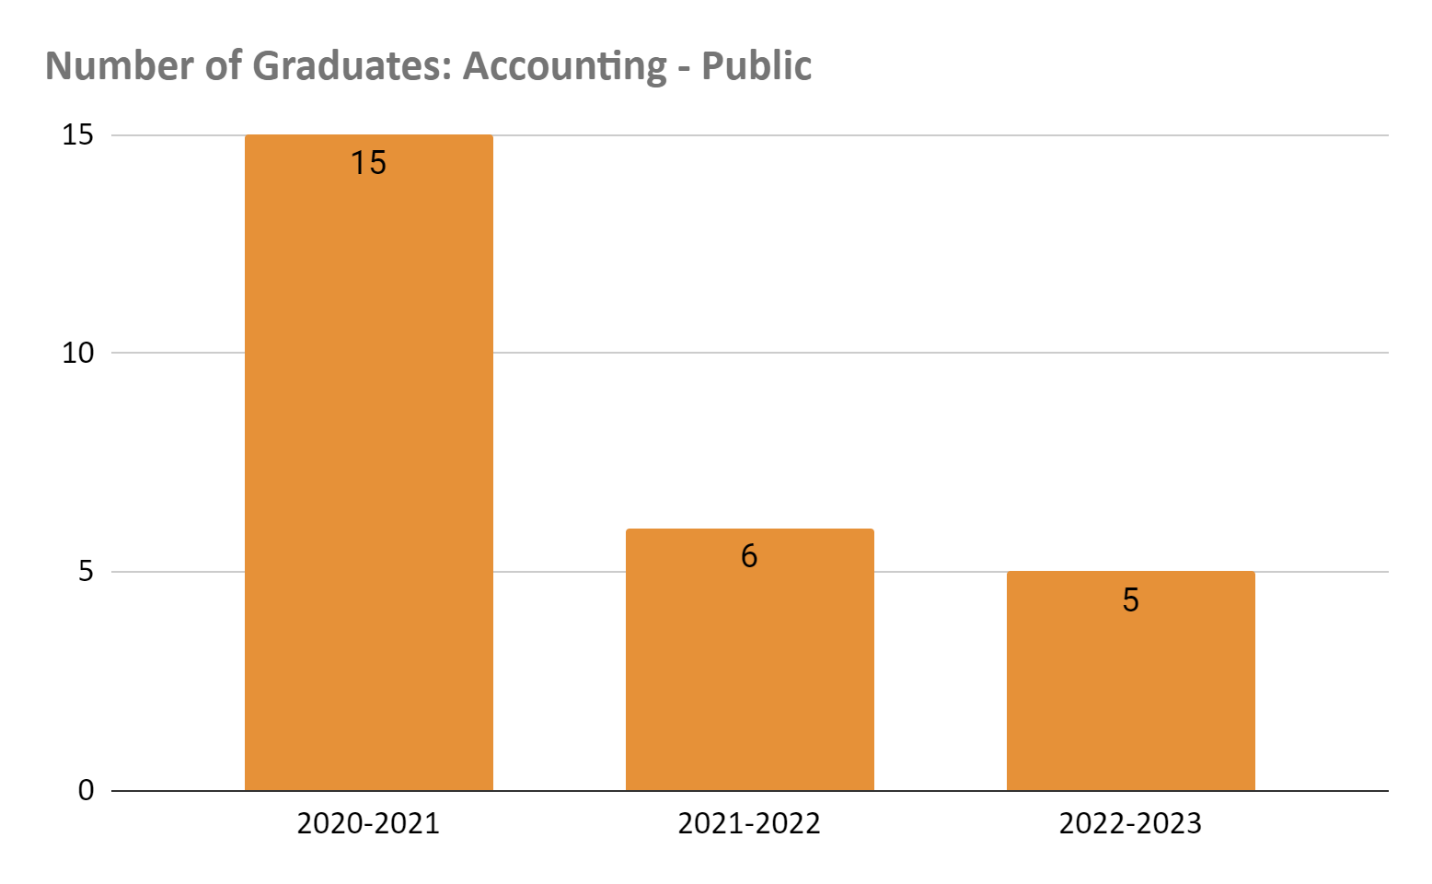 Number of Graduates - Accounting